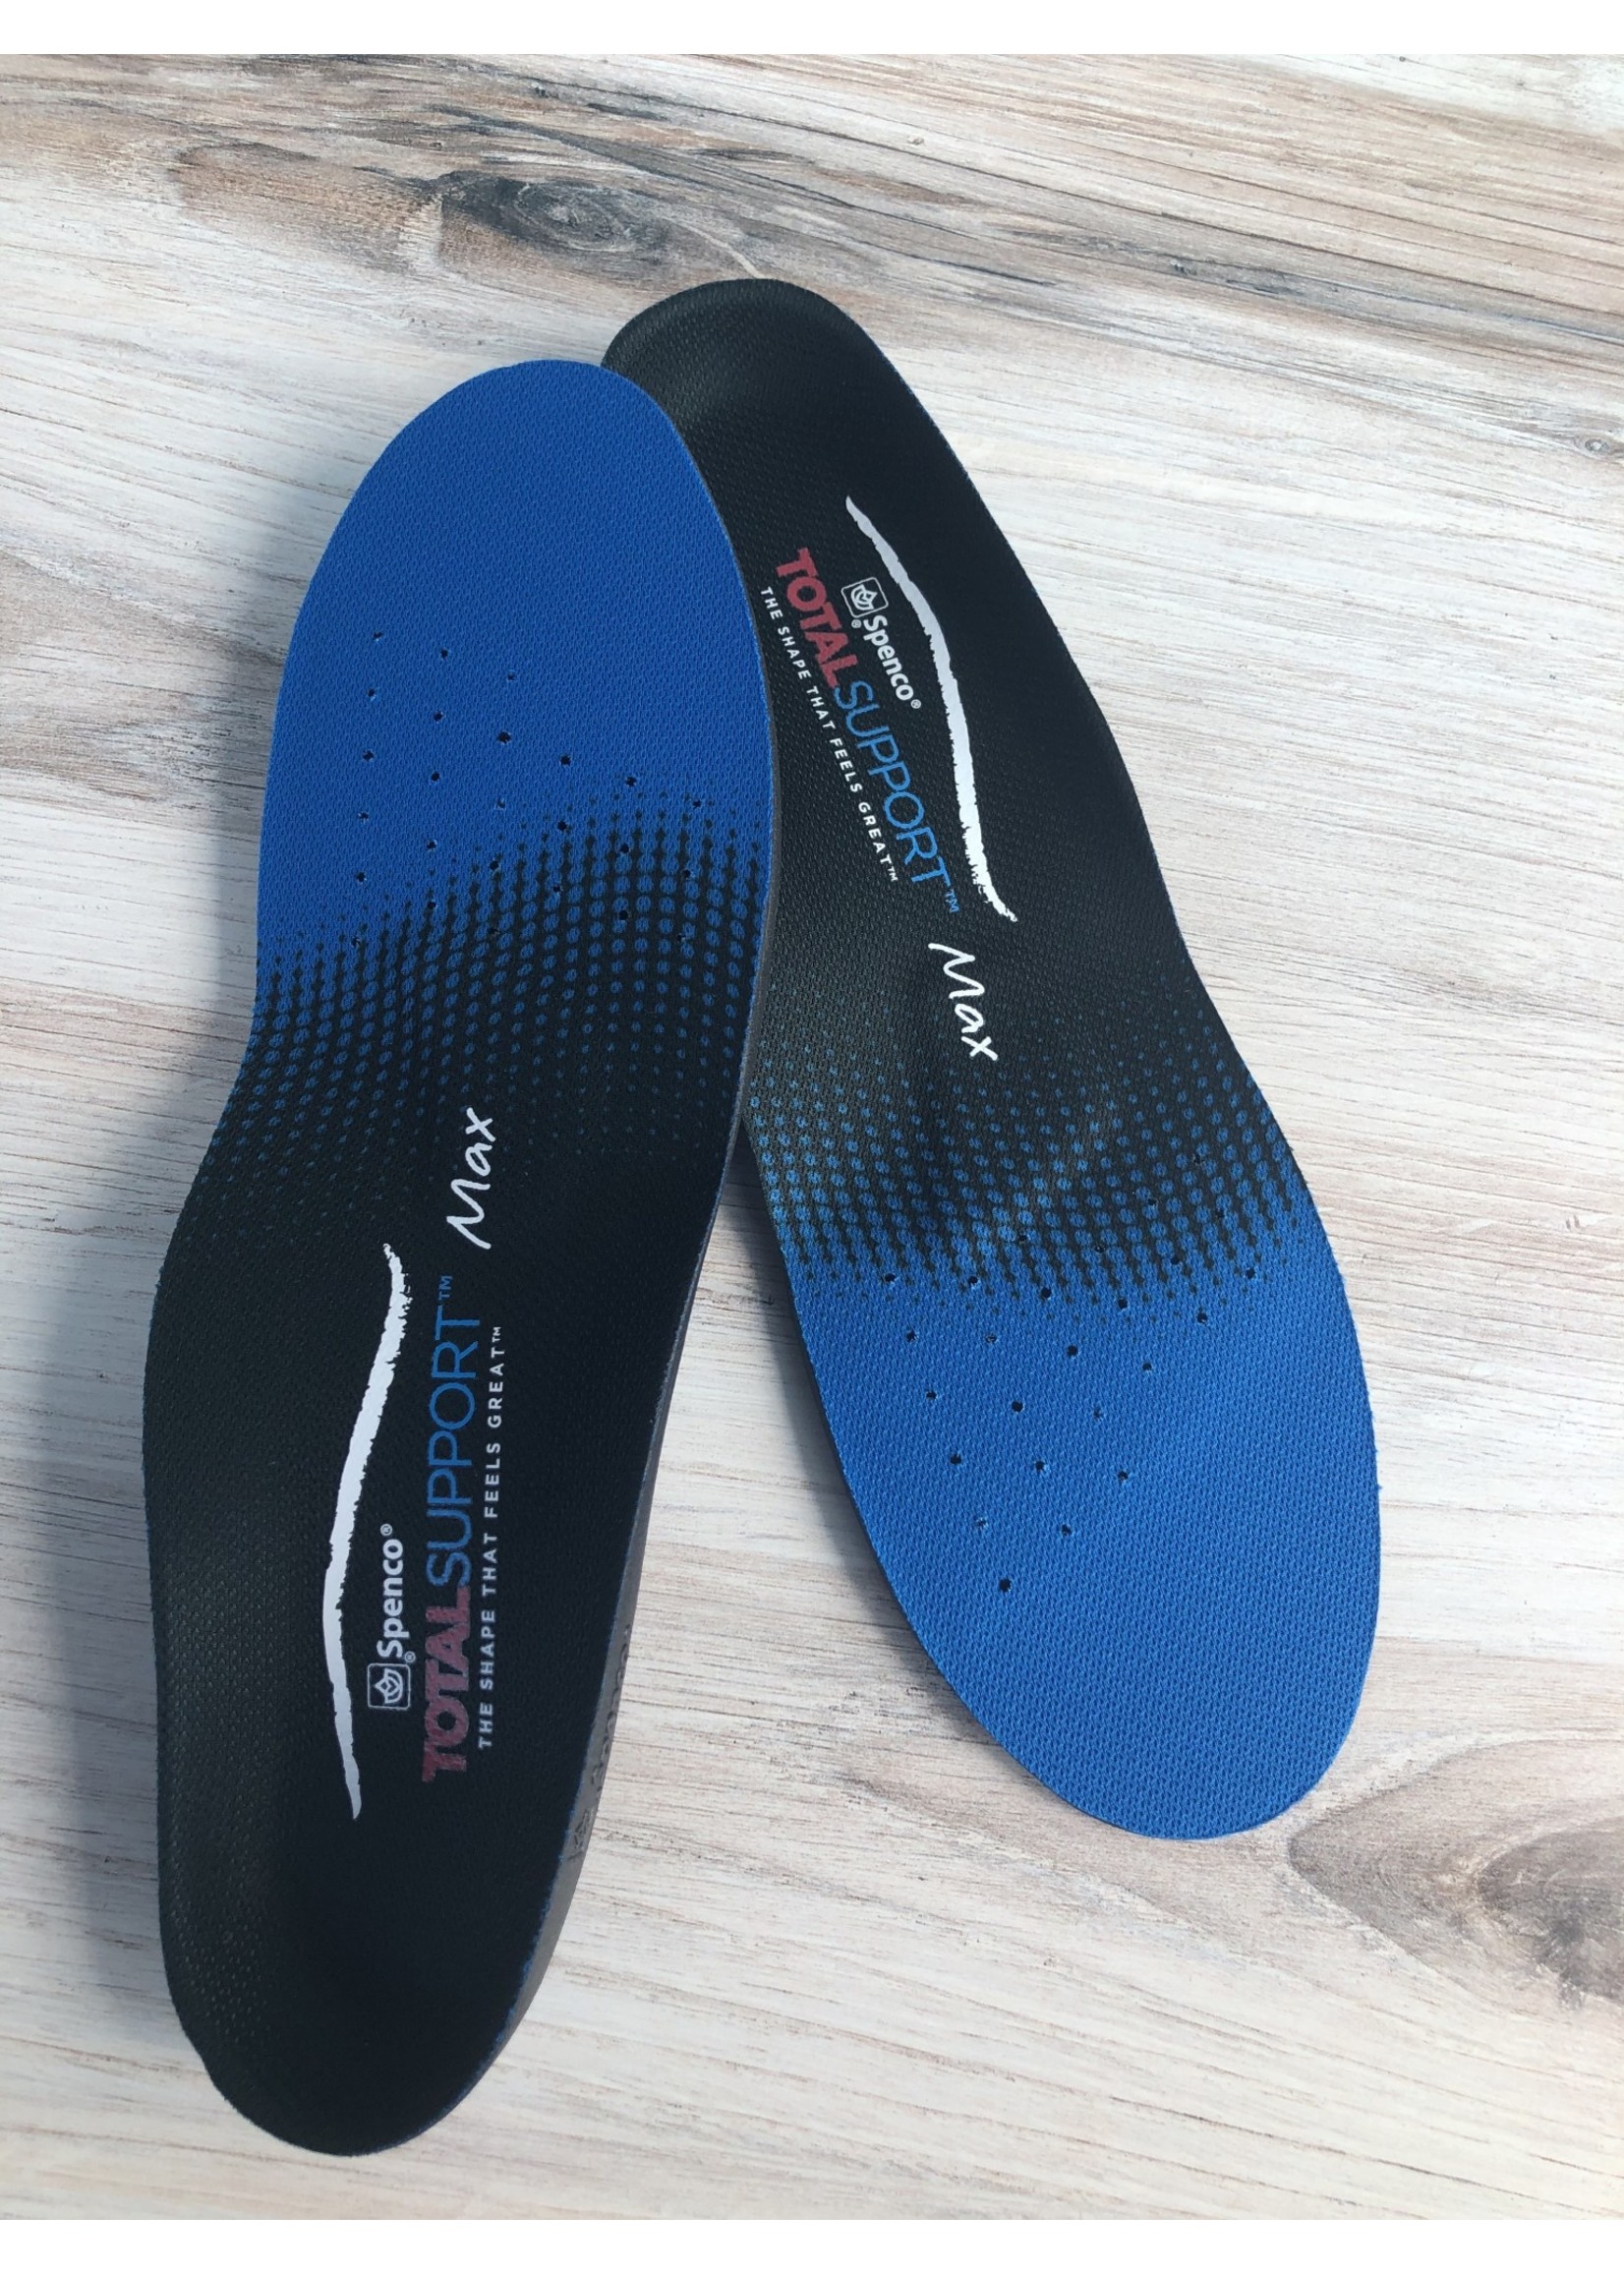 Total Support Max Insoles 46-210